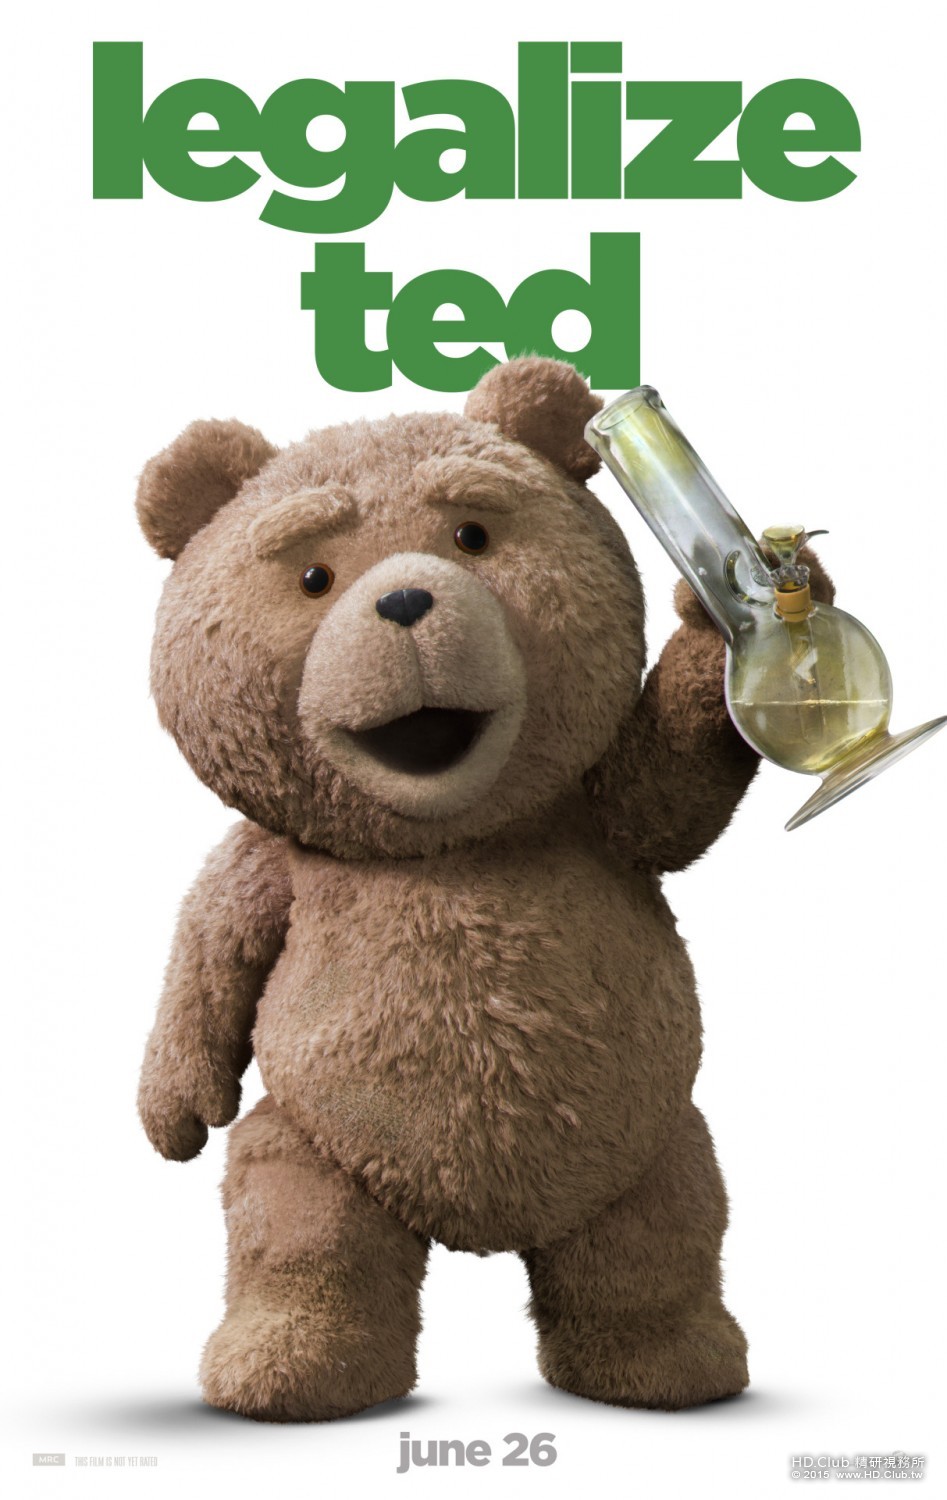 ted_two_ver2_xlg.jpg